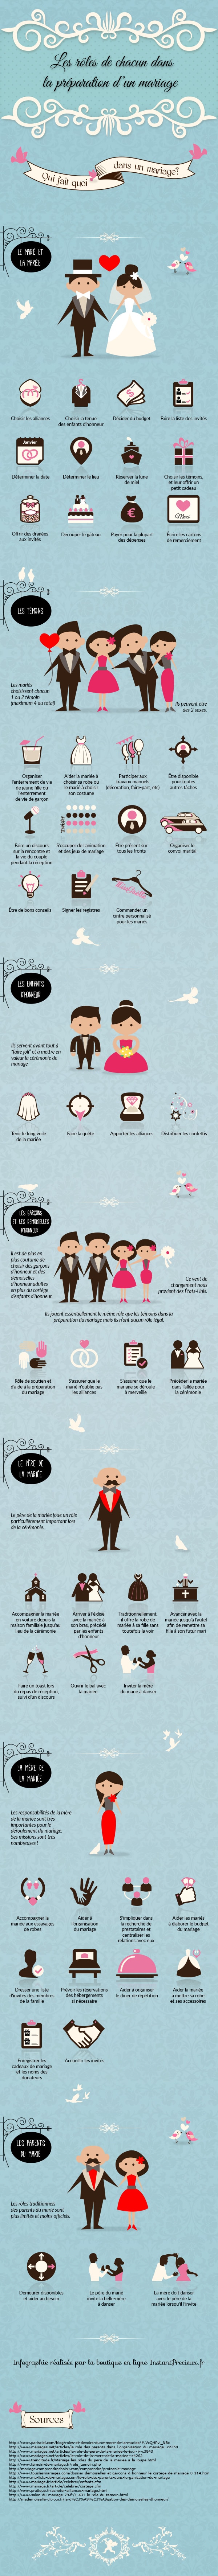 infographie mariage